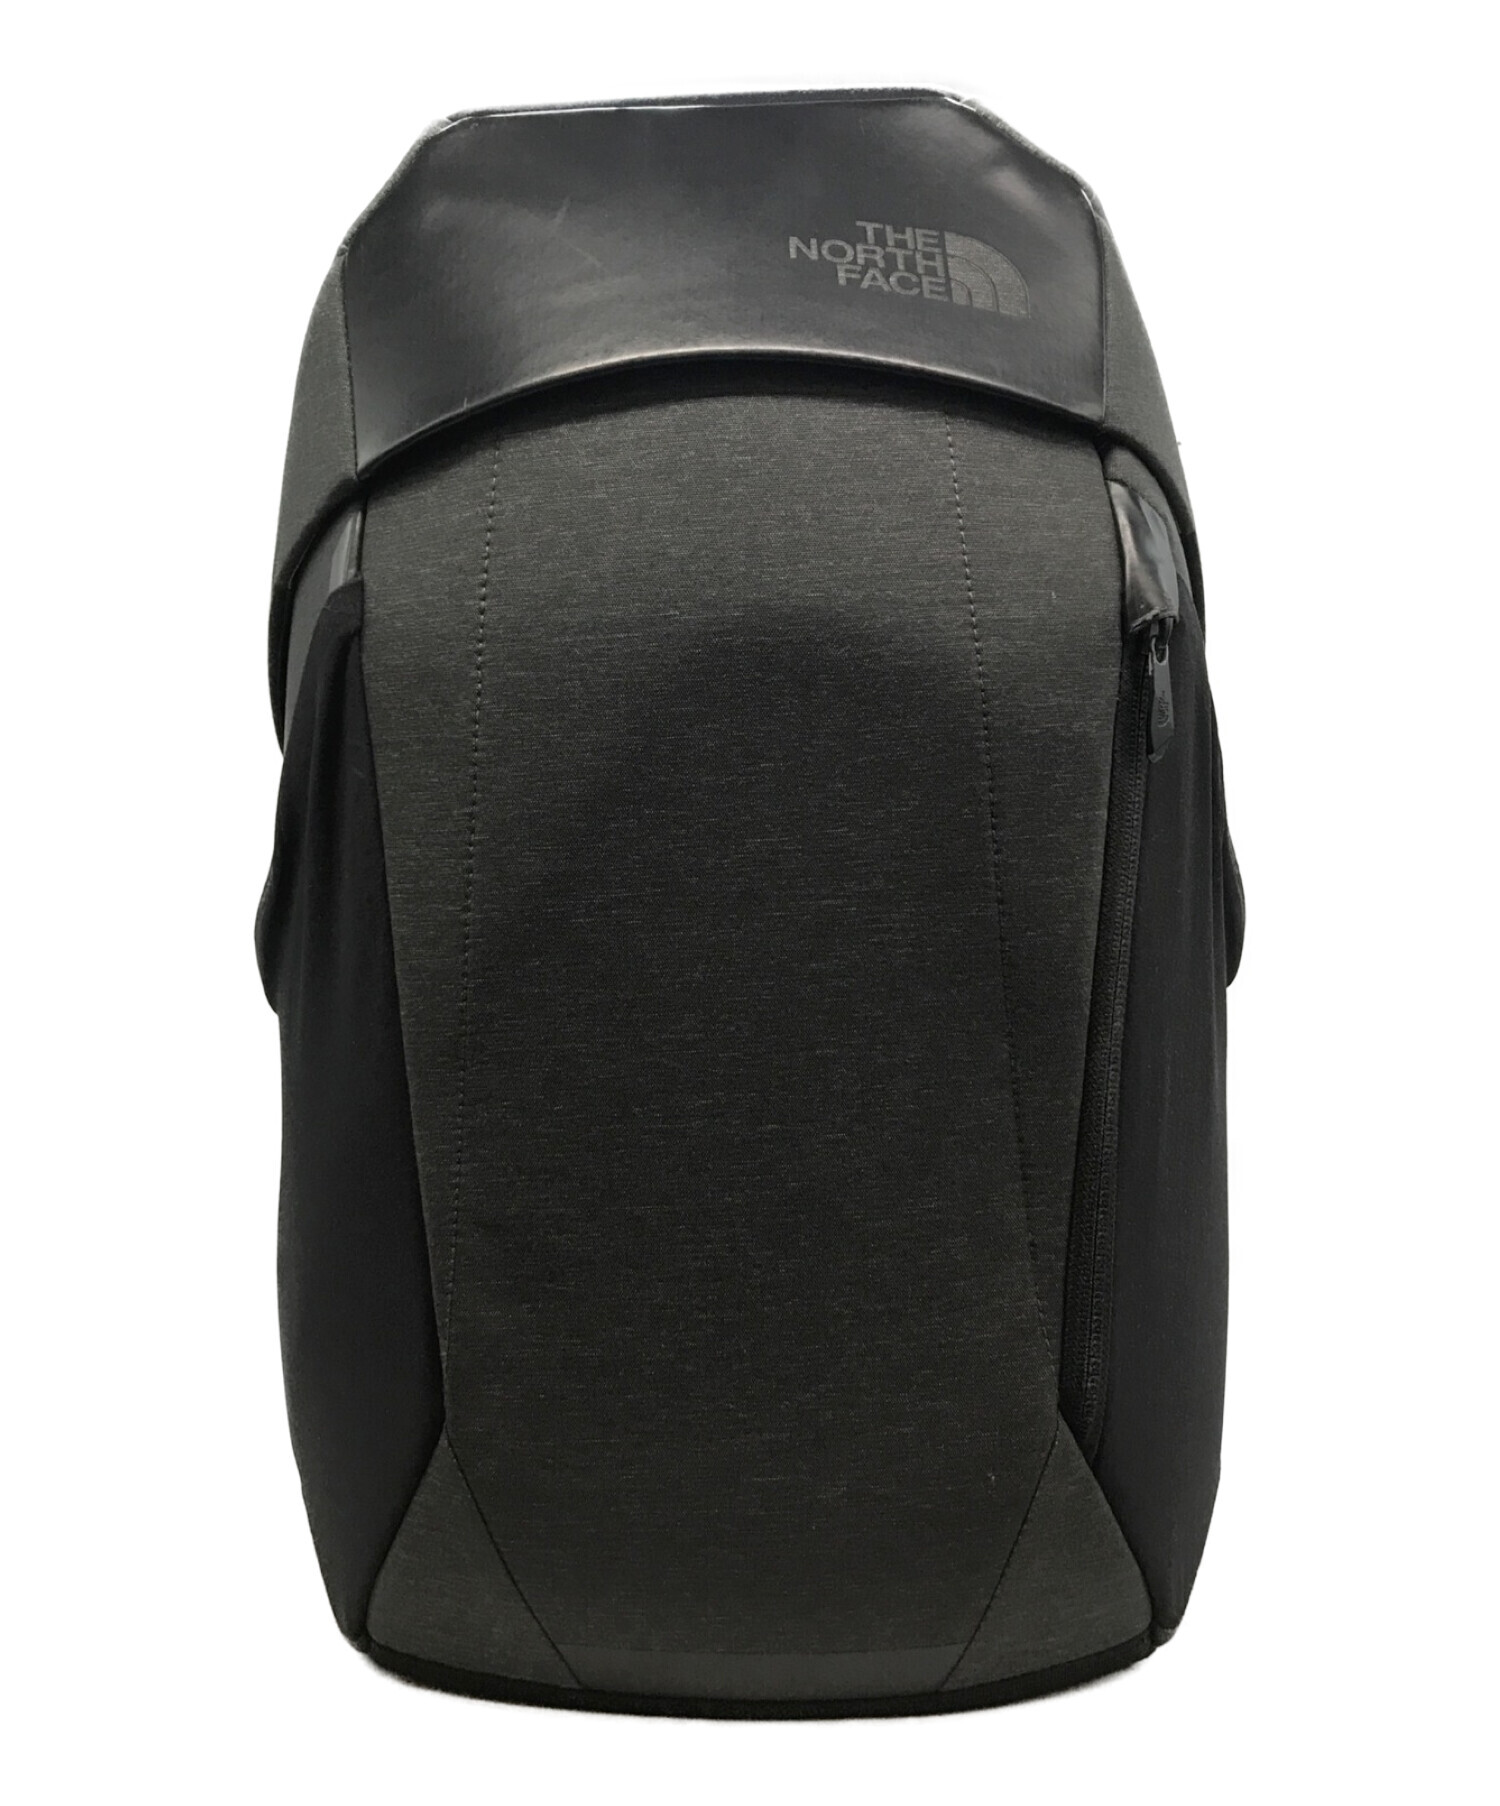 THE NORTH FACE ACCESS PACK O2 リュック